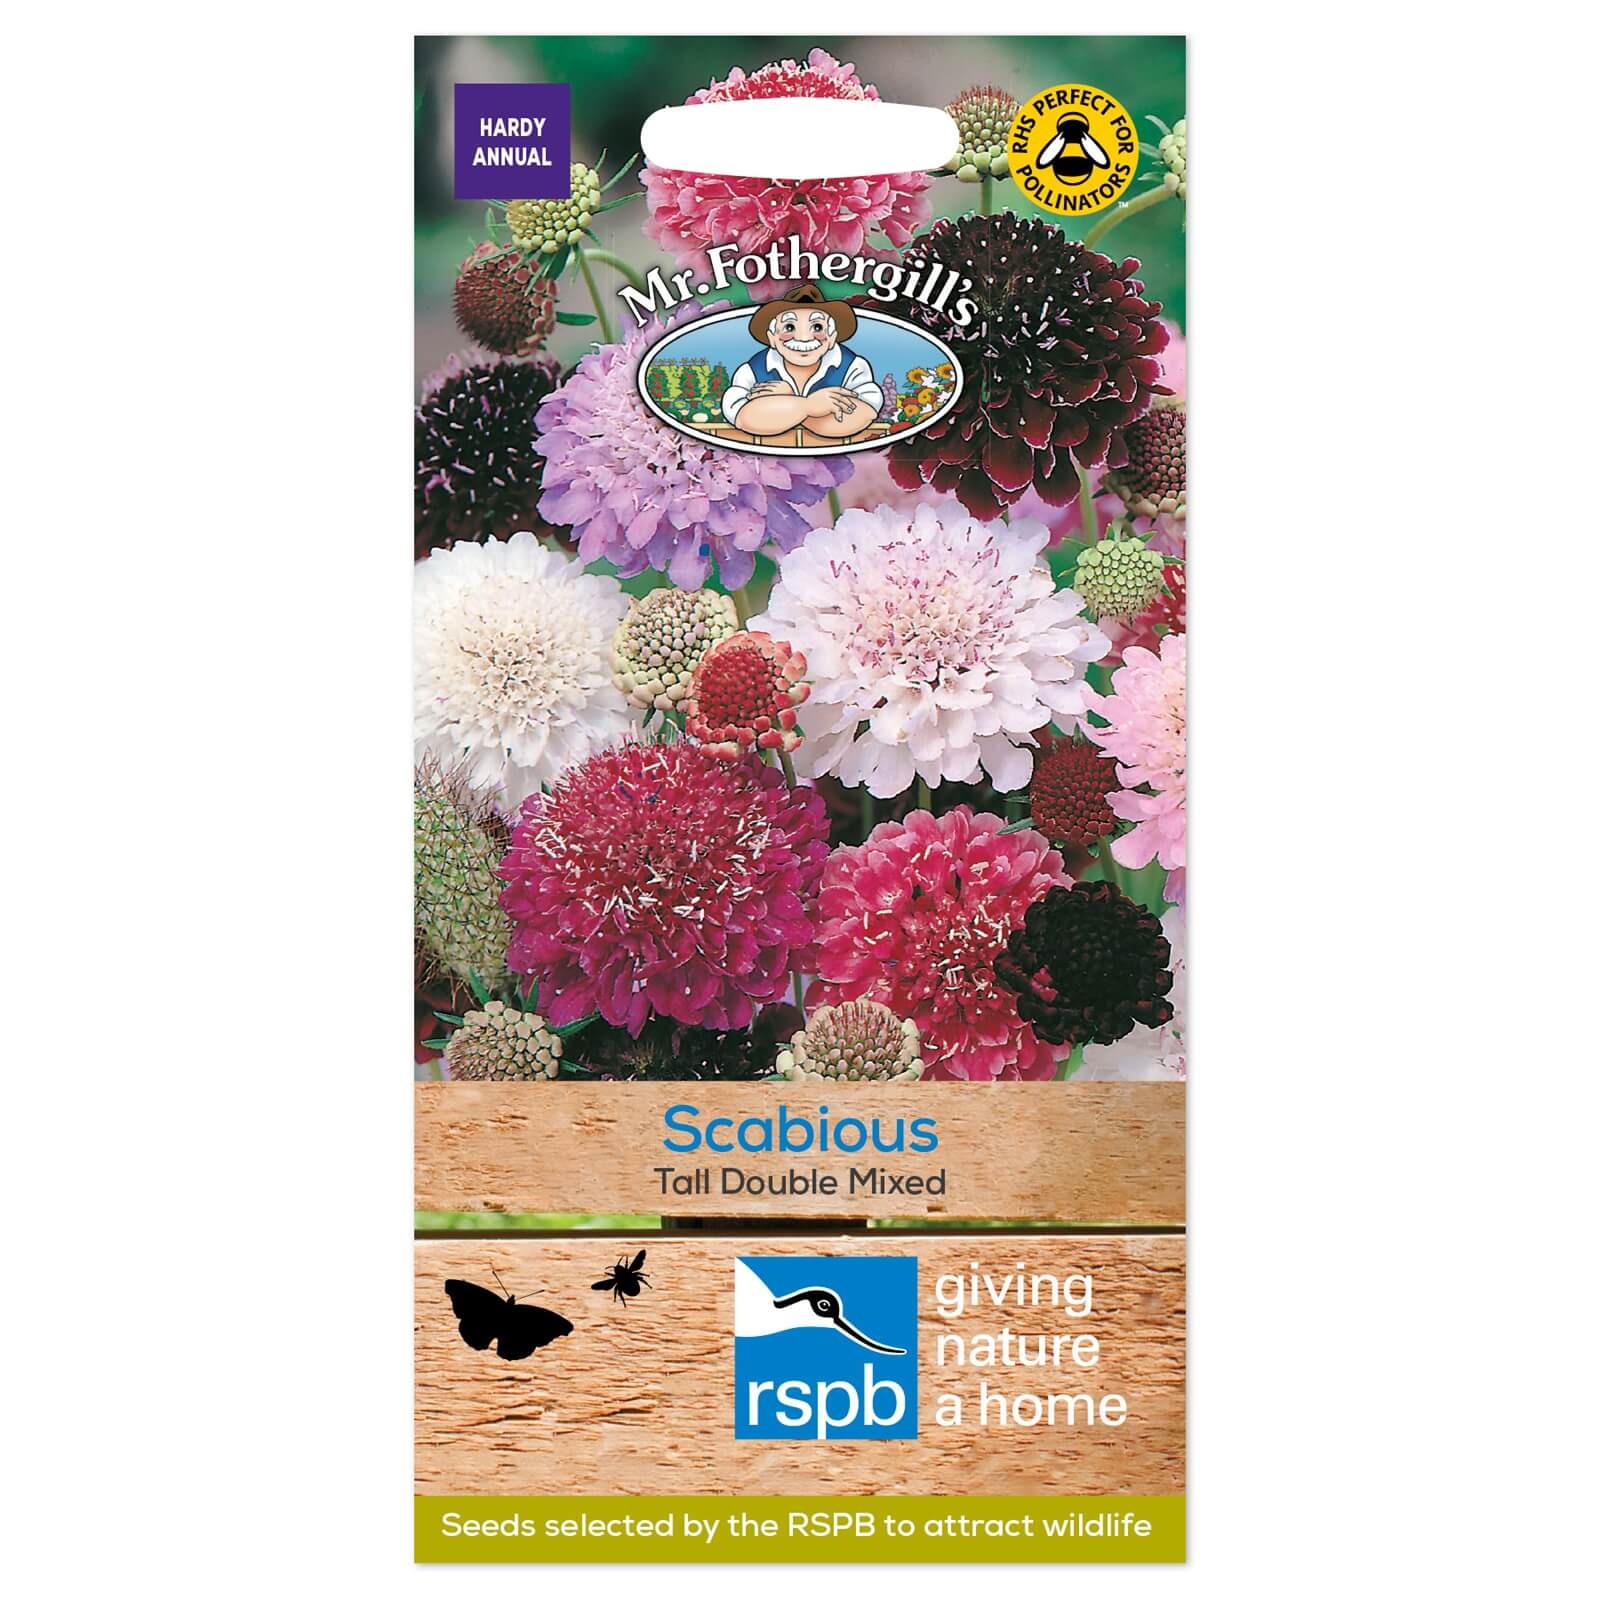 Mr. Fothergill's Scabious Tall Double Mixed Seeds